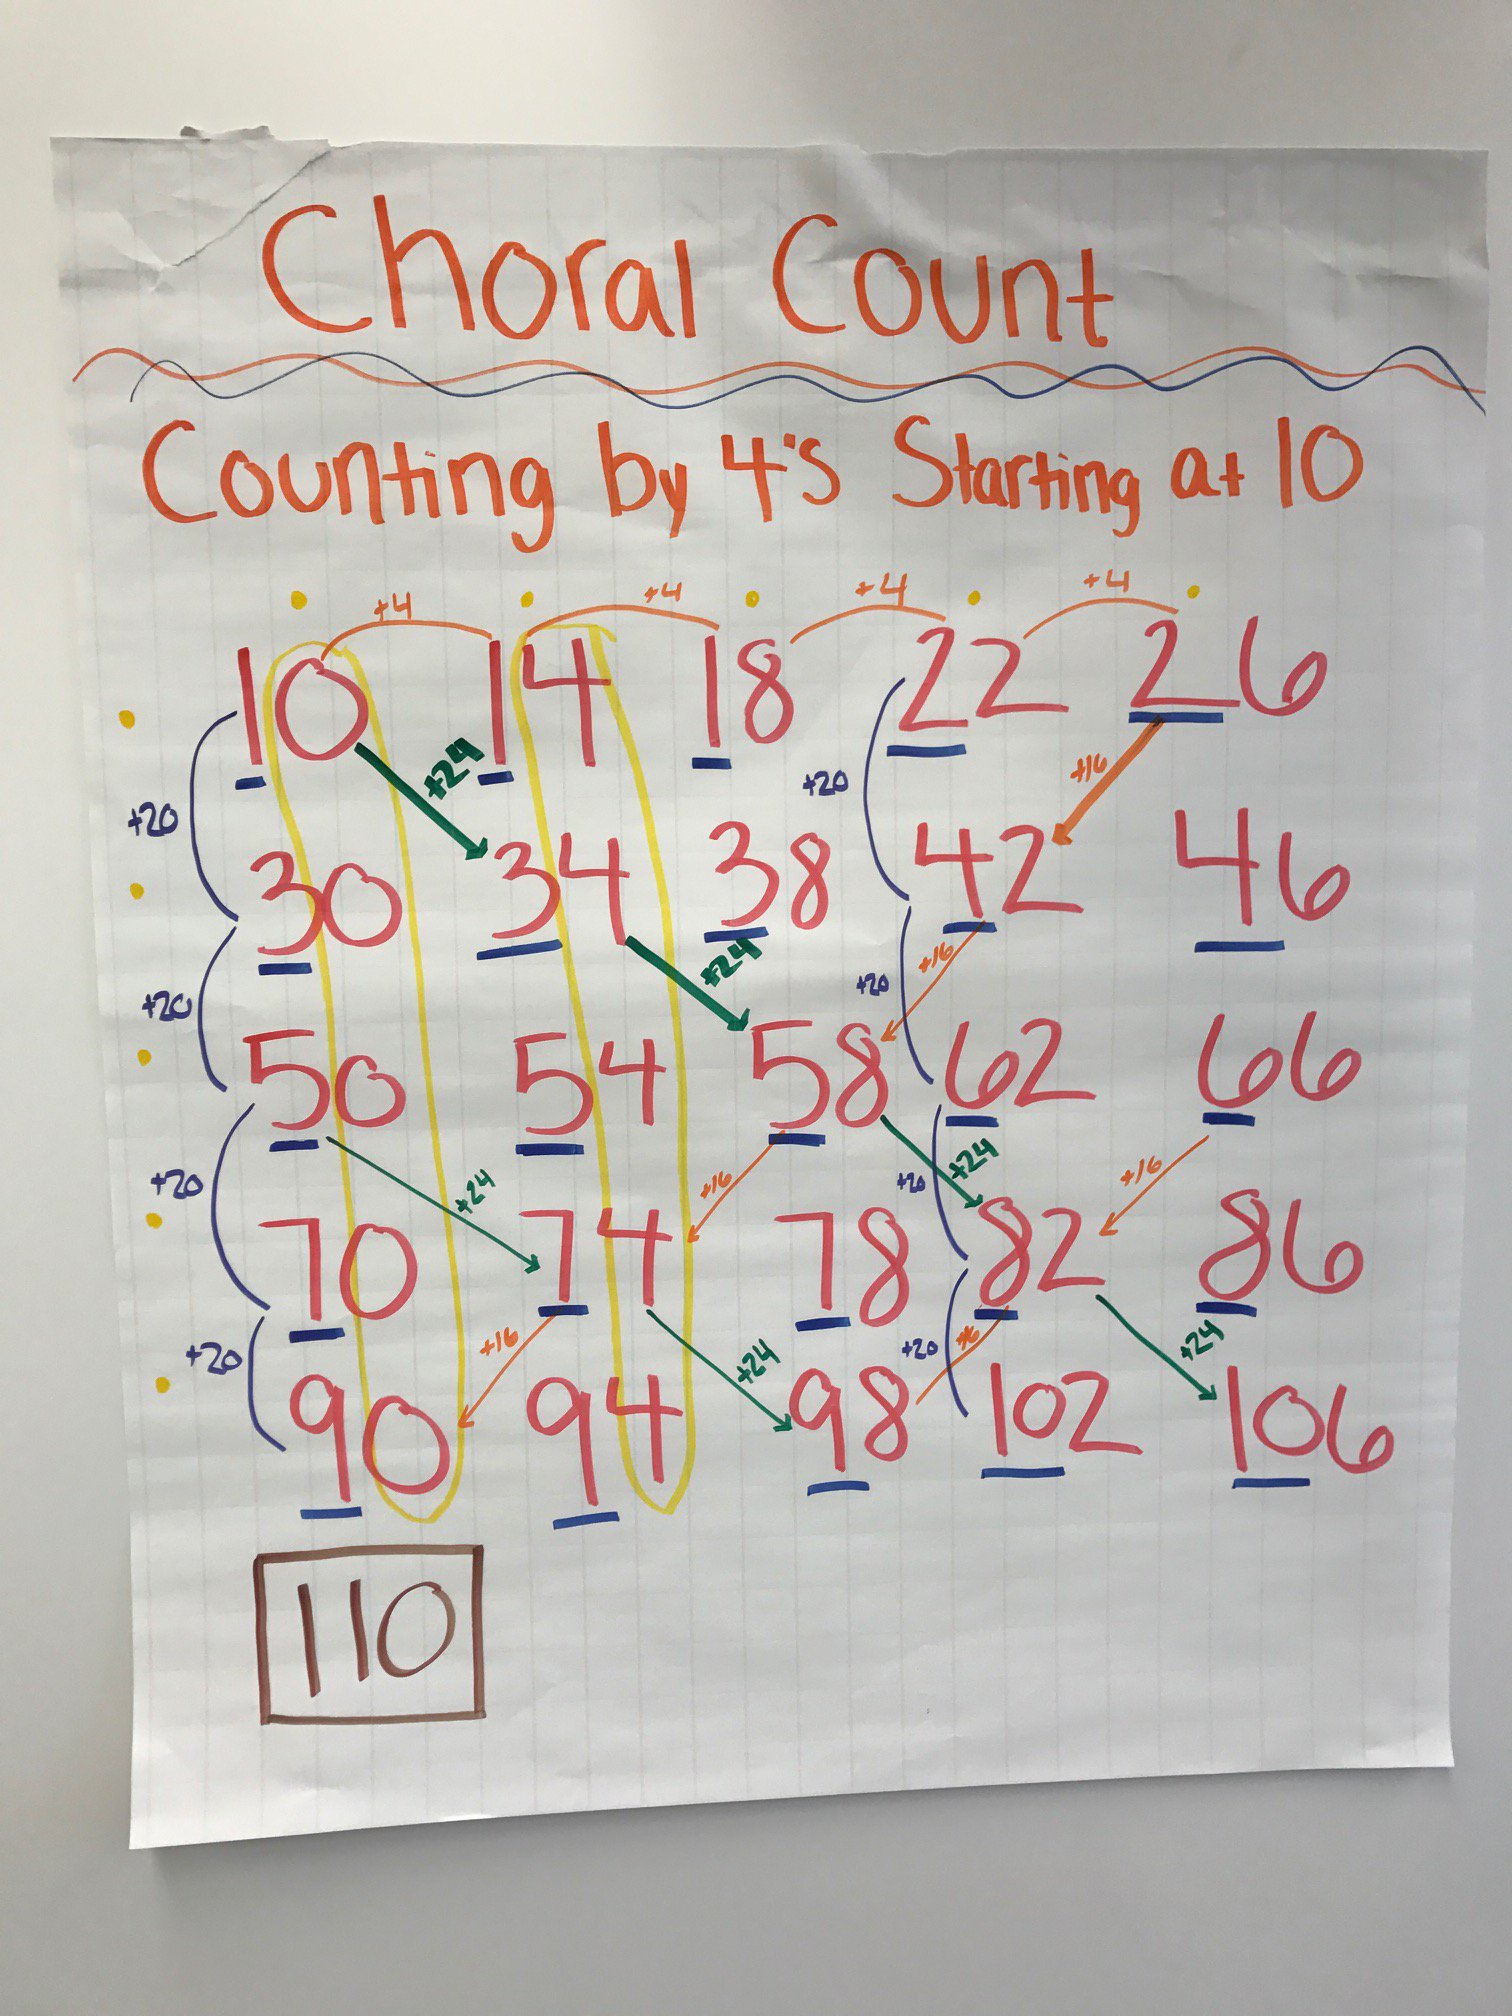 Counting up by 4s from 10